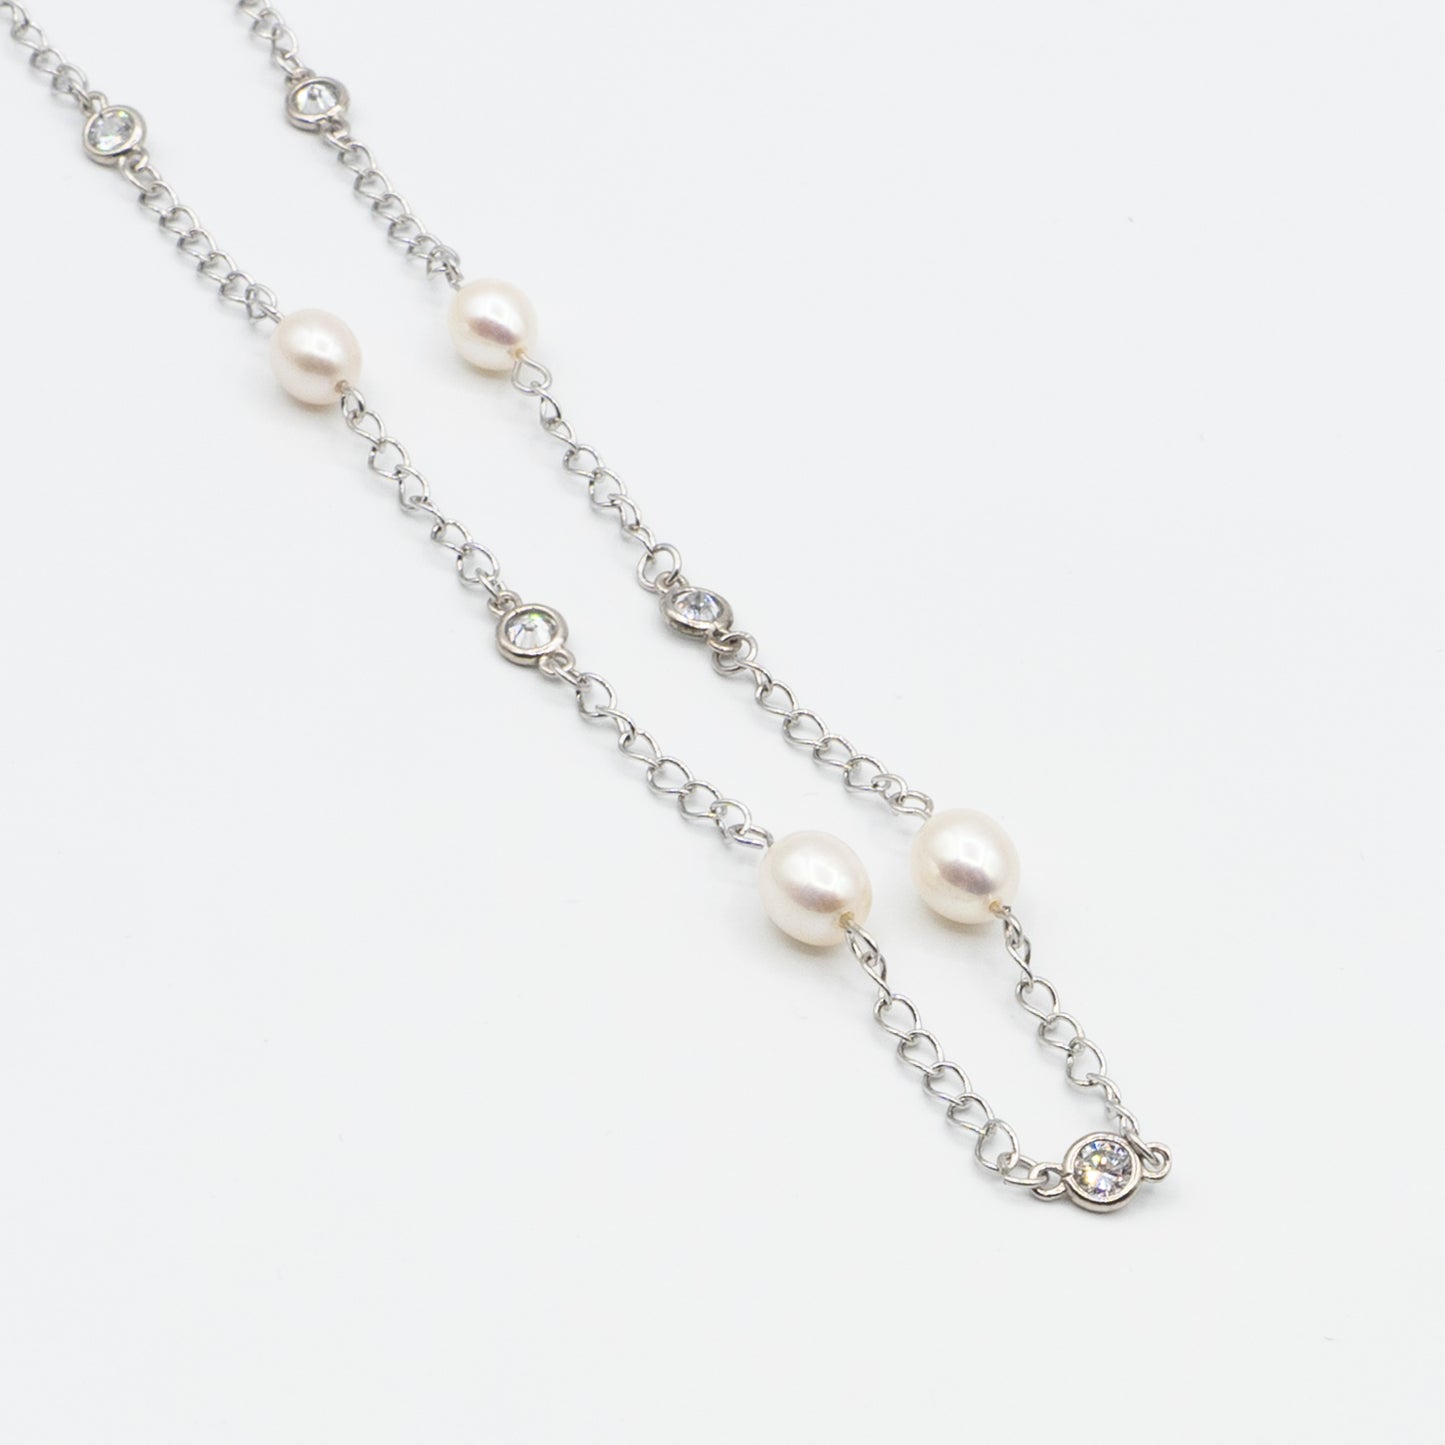 KATLEEN - sterling silver and fresh water pearl necklace